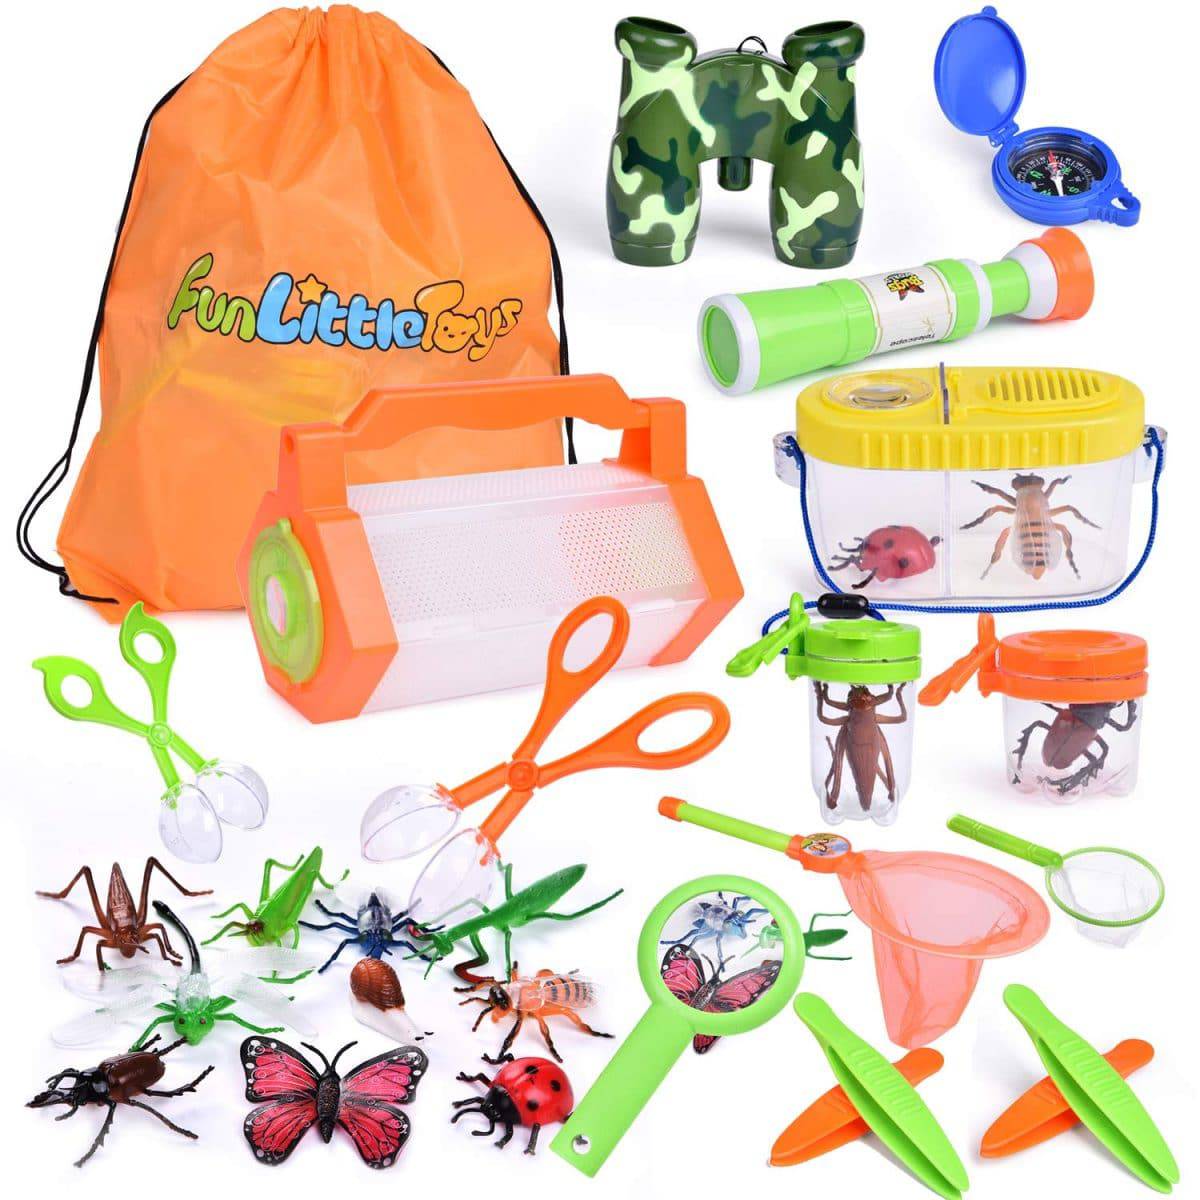 Lot Of 12 Insect Bug Catcher Toy Sets U.S Toy